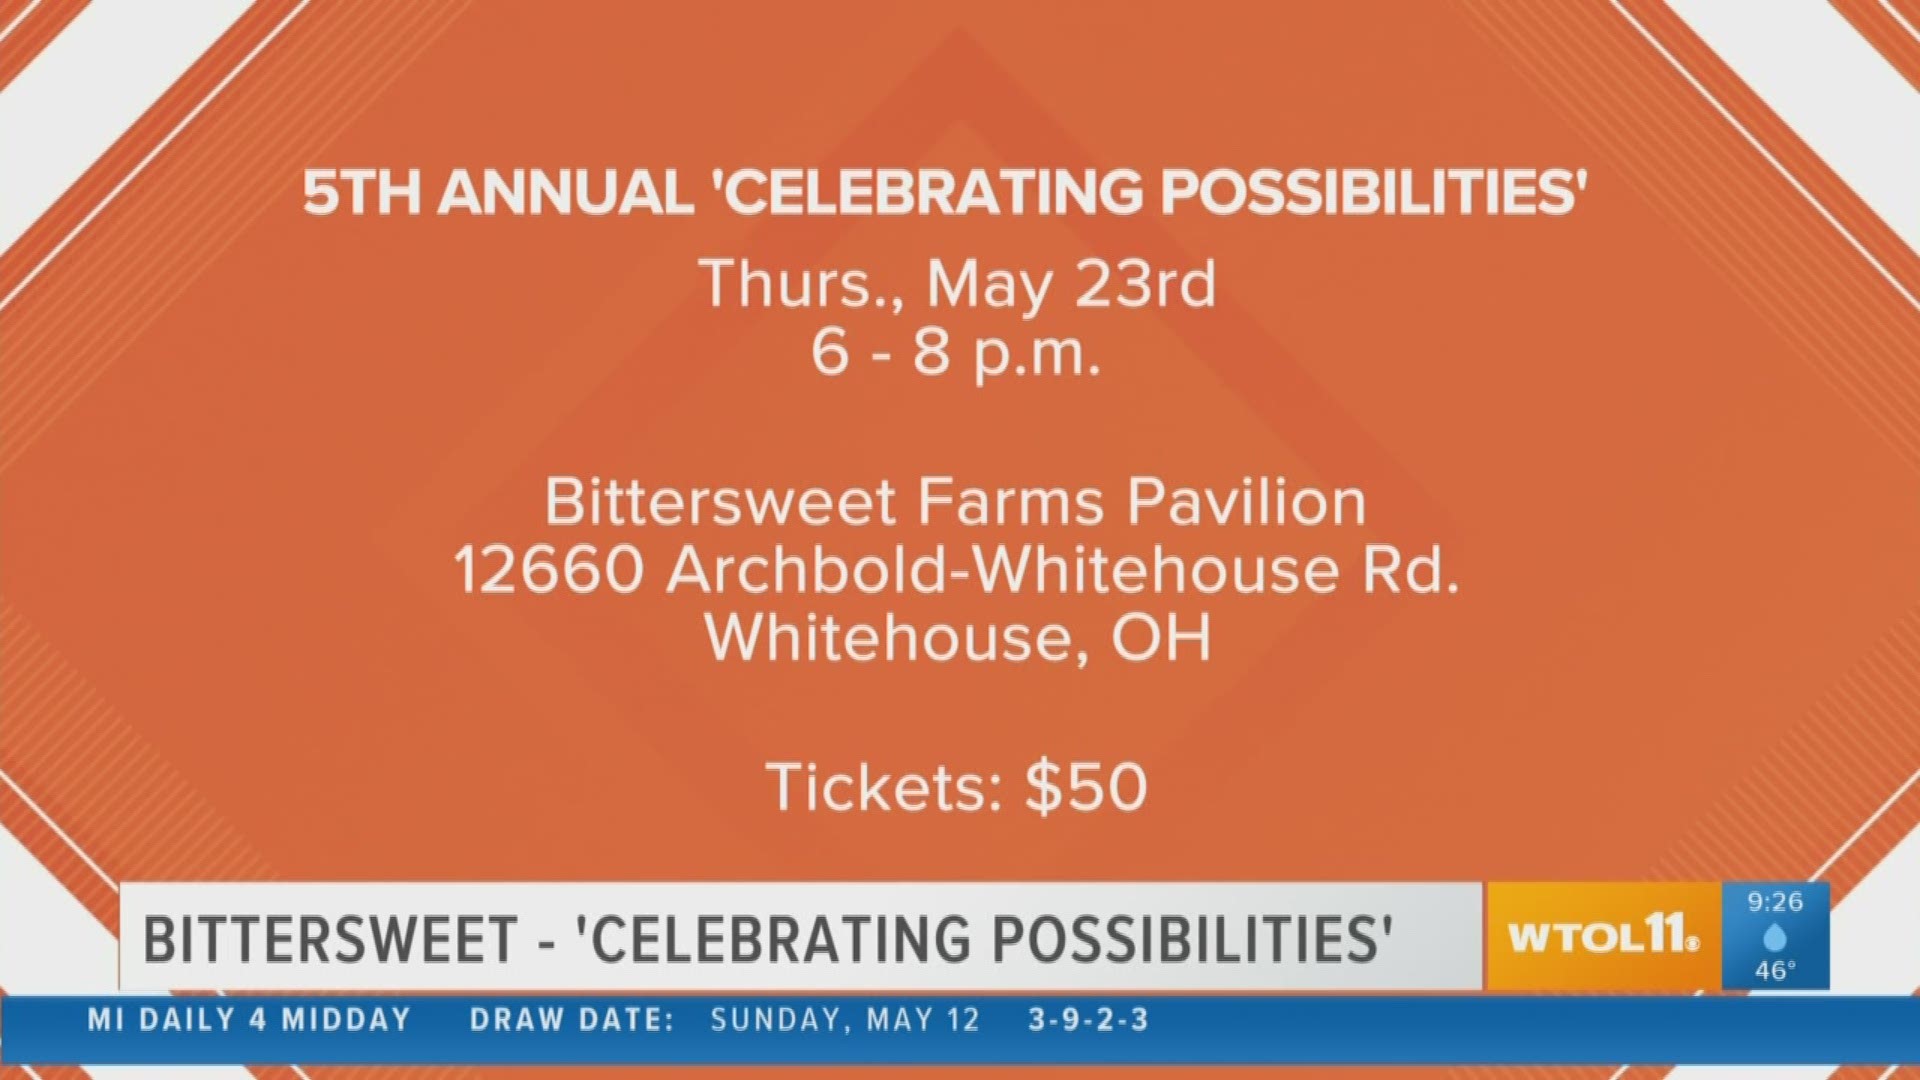 Bittersweet Farms invite everyone to "celebrate the possibilities" for individuals with autism on May 23.